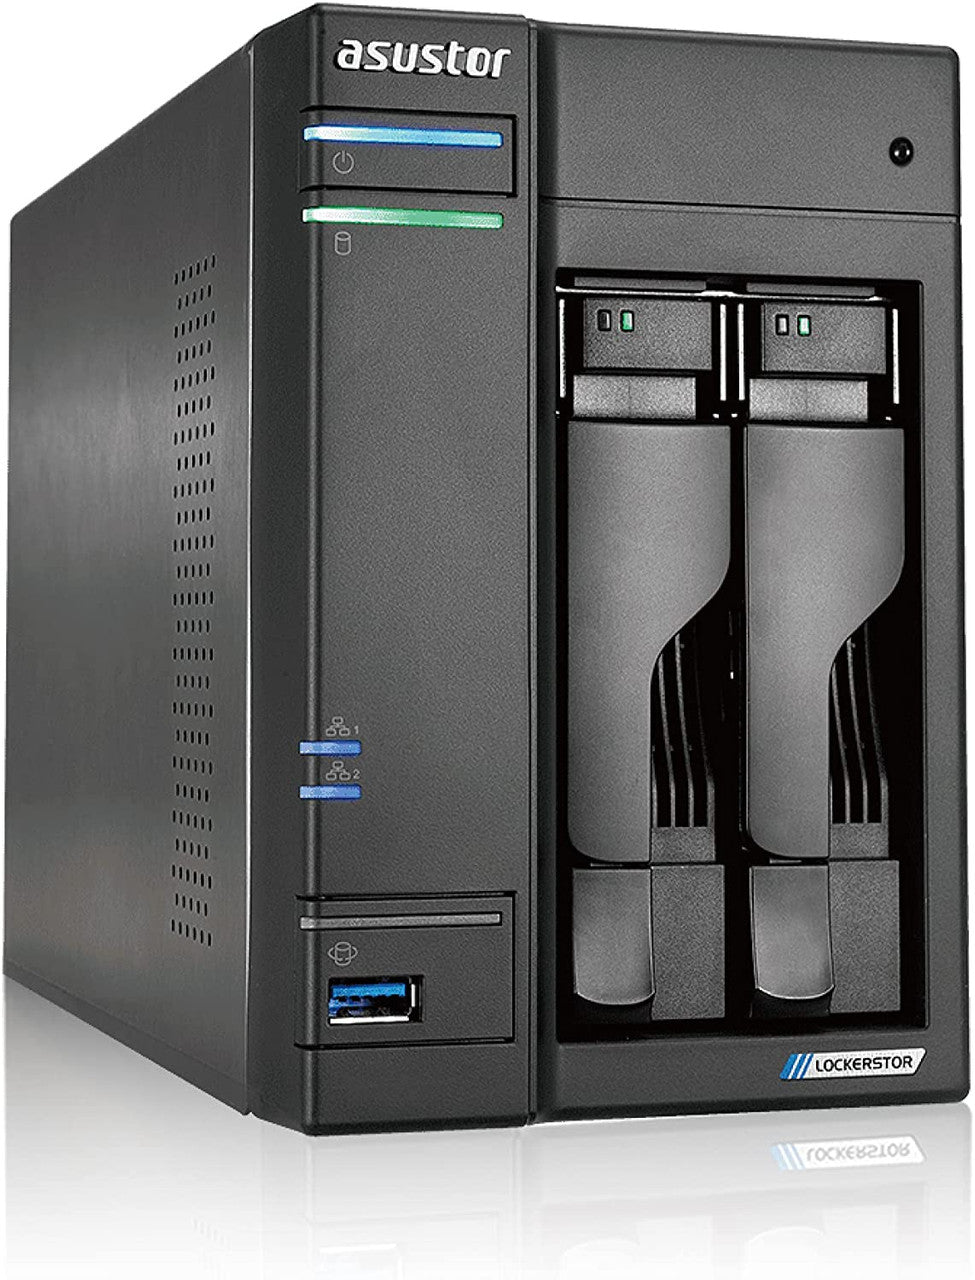 Asustor AS6602T 2-Bay Lockerstor 2 NAS with 4GB RAM and 24TB (2x12TB) Seagate Ironwolf PRO Drives